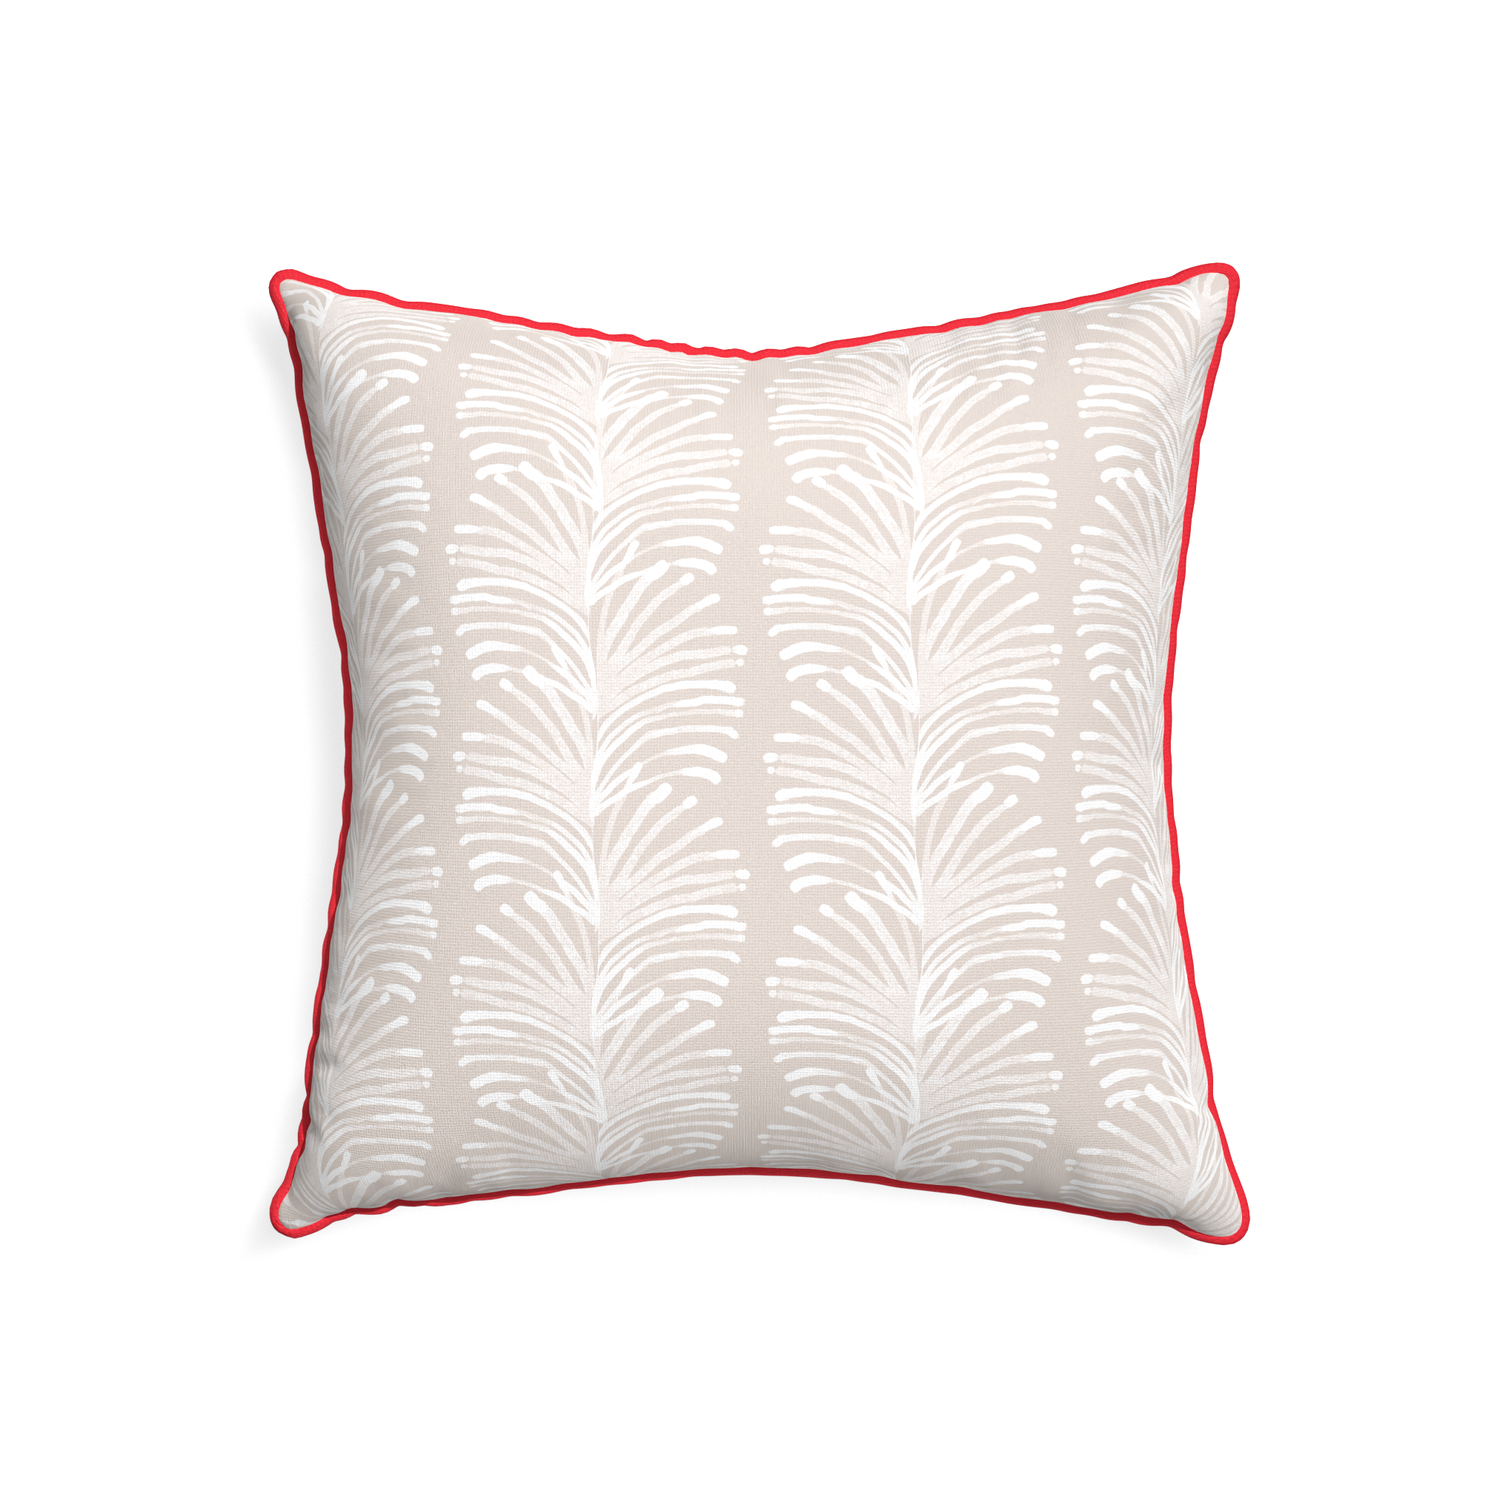 22-square emma sand custom pillow with cherry piping on white background